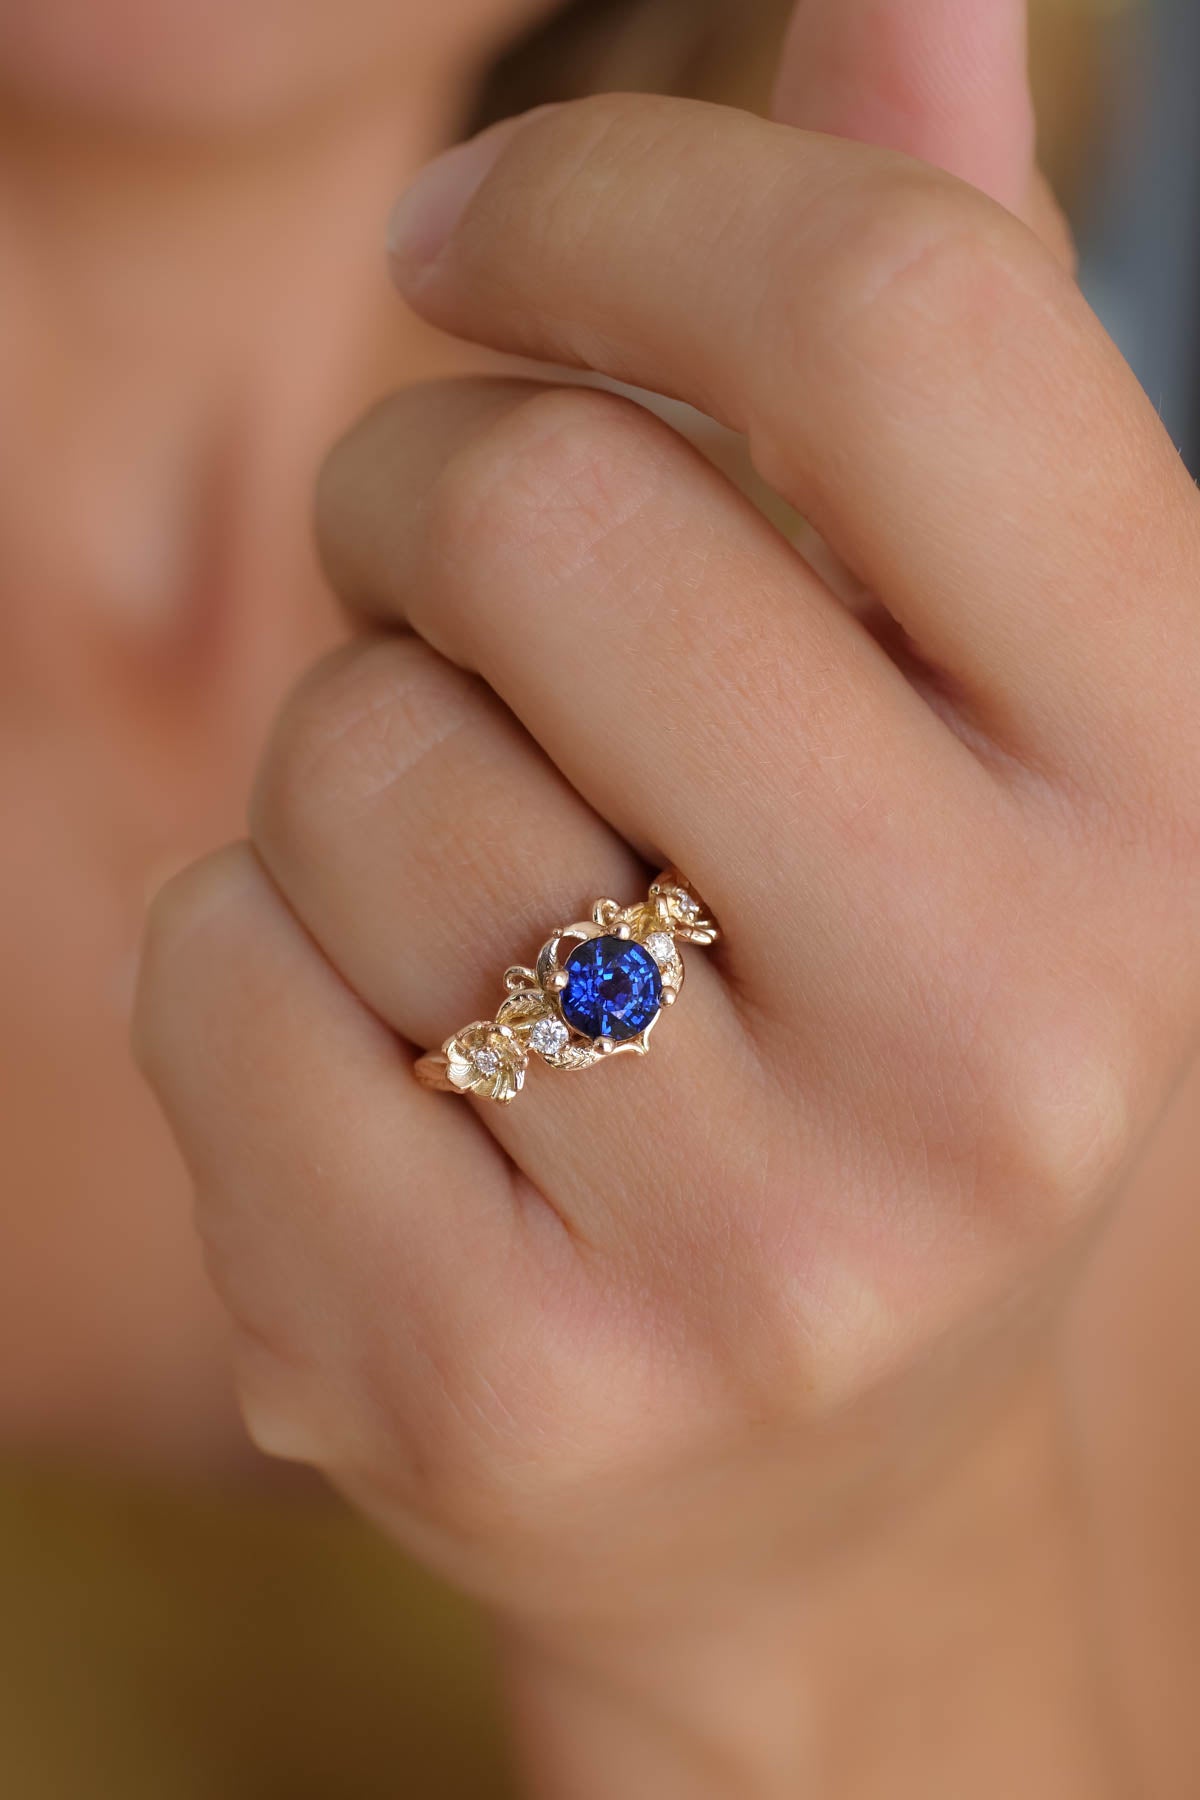 Royal blue sapphire engagement ring, floral ring with diamonds / Adelina - Eden Garden Jewelry™